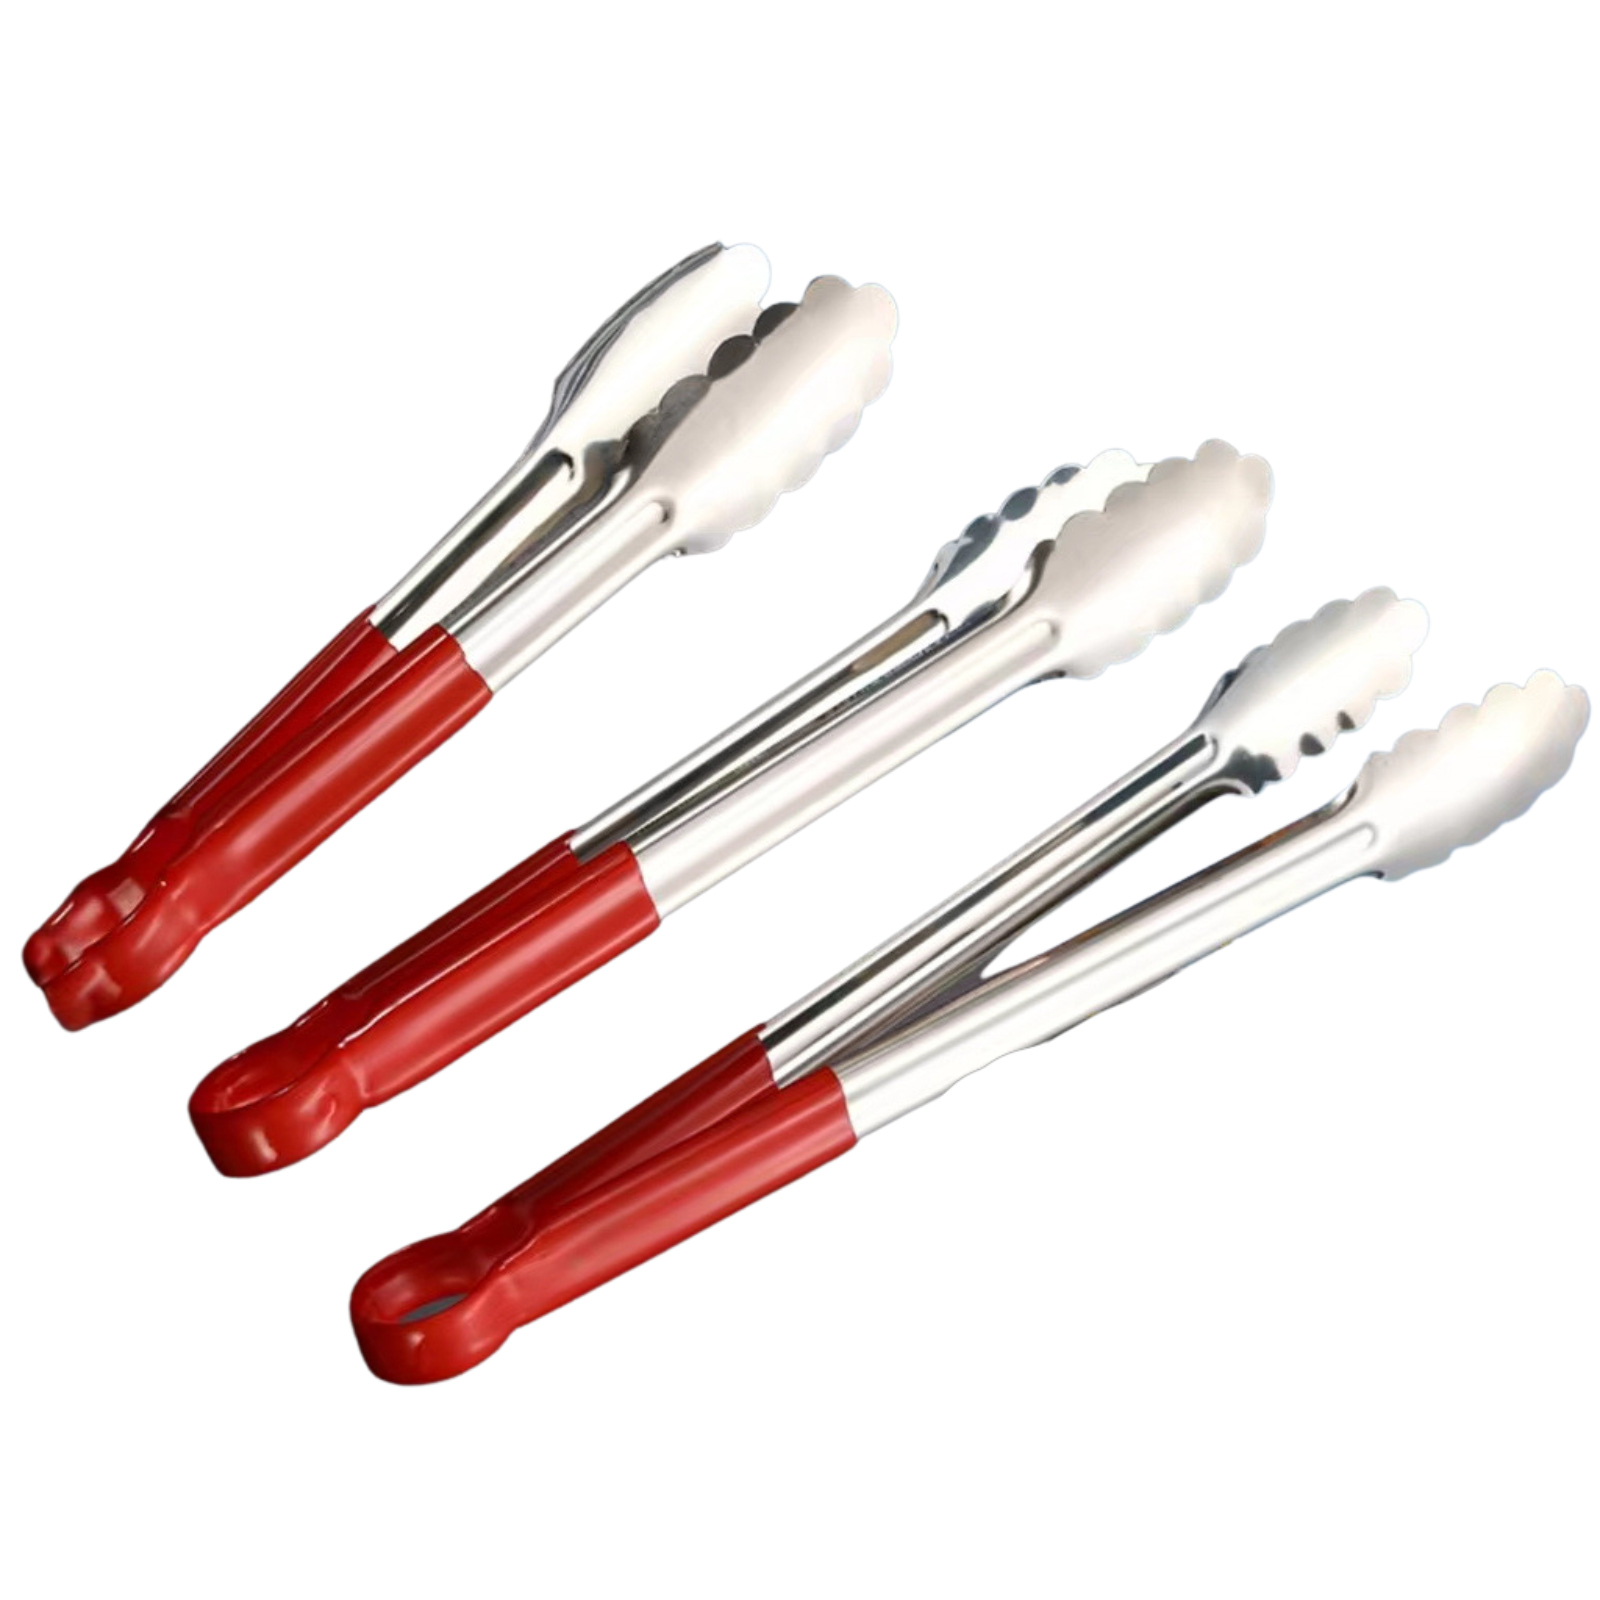 1pc Silicone Tongs, Minimalist Red Food Tongs For Kitchen